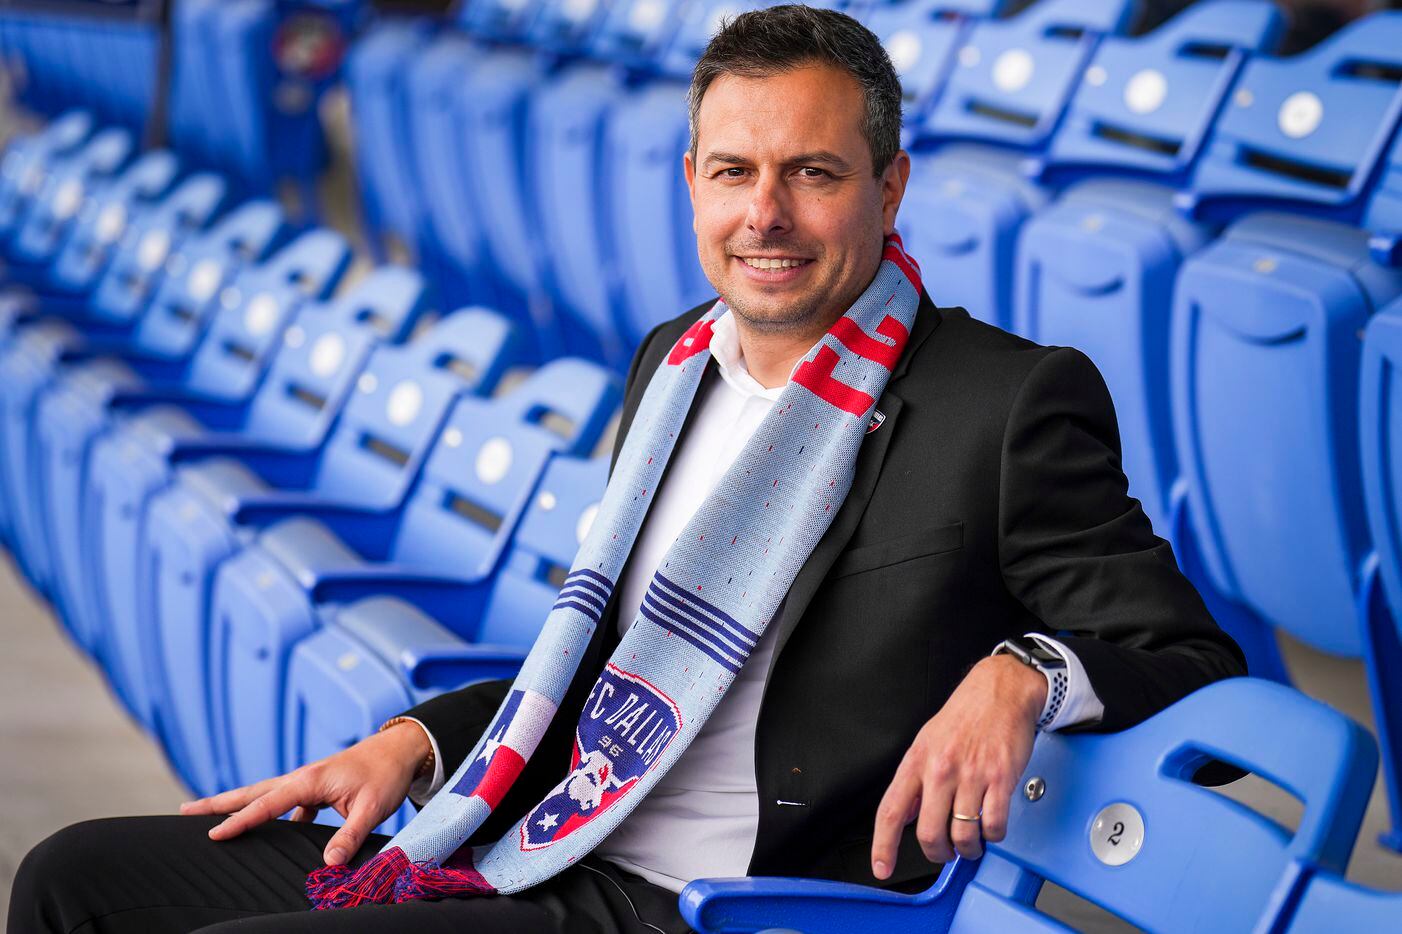 As new manager Nico Estévez takes his post, FC Dallas hopes to improve over  disappointing 2021